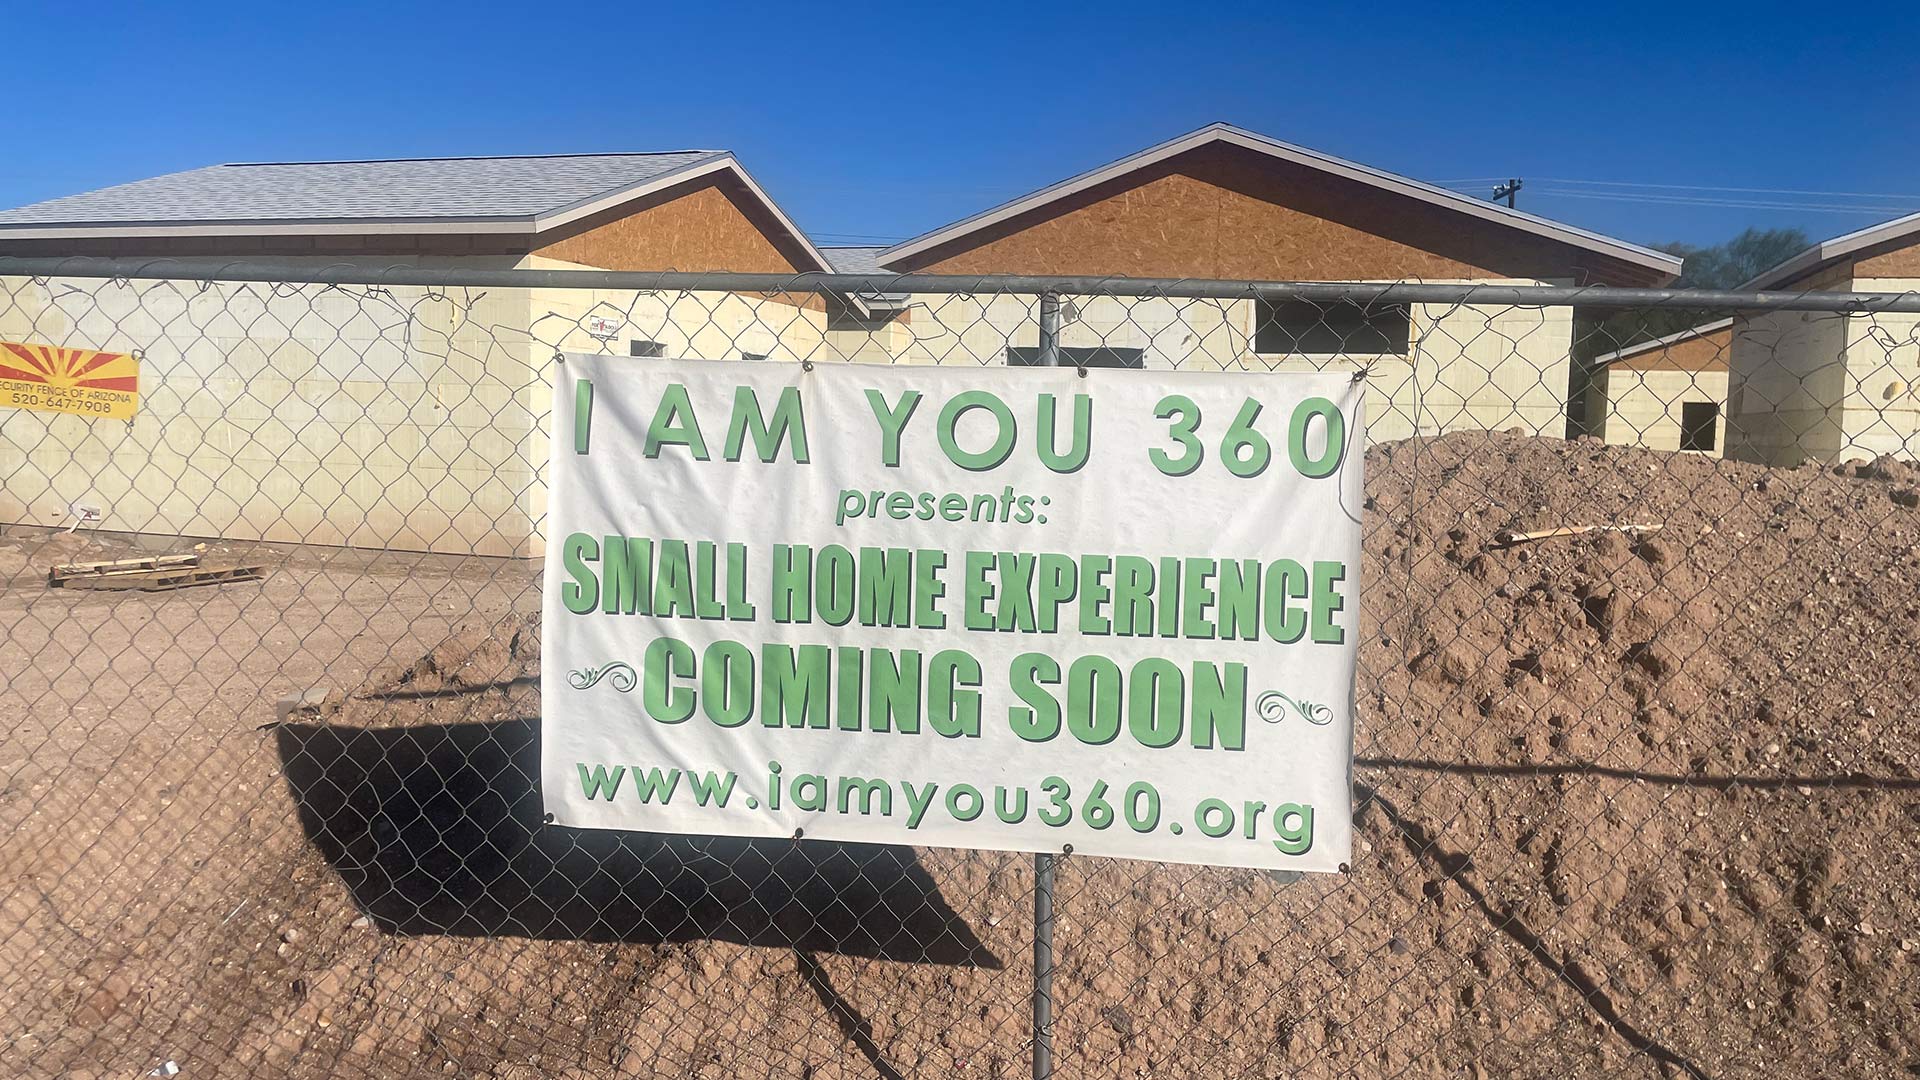 I Am You 360 is building a second group of tiny homes to house clients right next to their office.